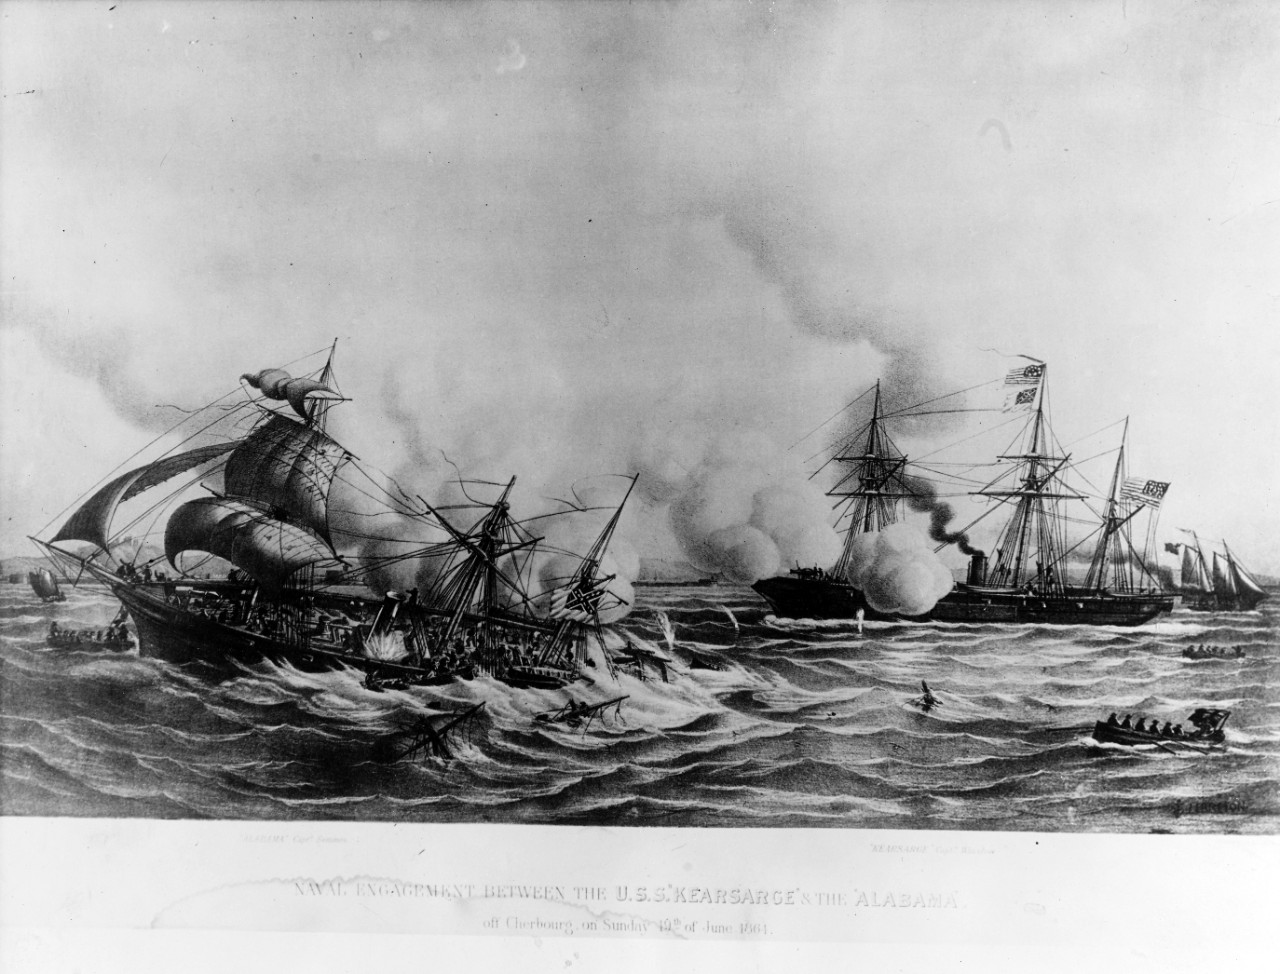 Photo #: NH 1157  &quot;Naval Engagement Between the U.S.S. 'Kearsarge' and the 'Alabama' -- off Cherbourg, 19th of June 1864&quot;